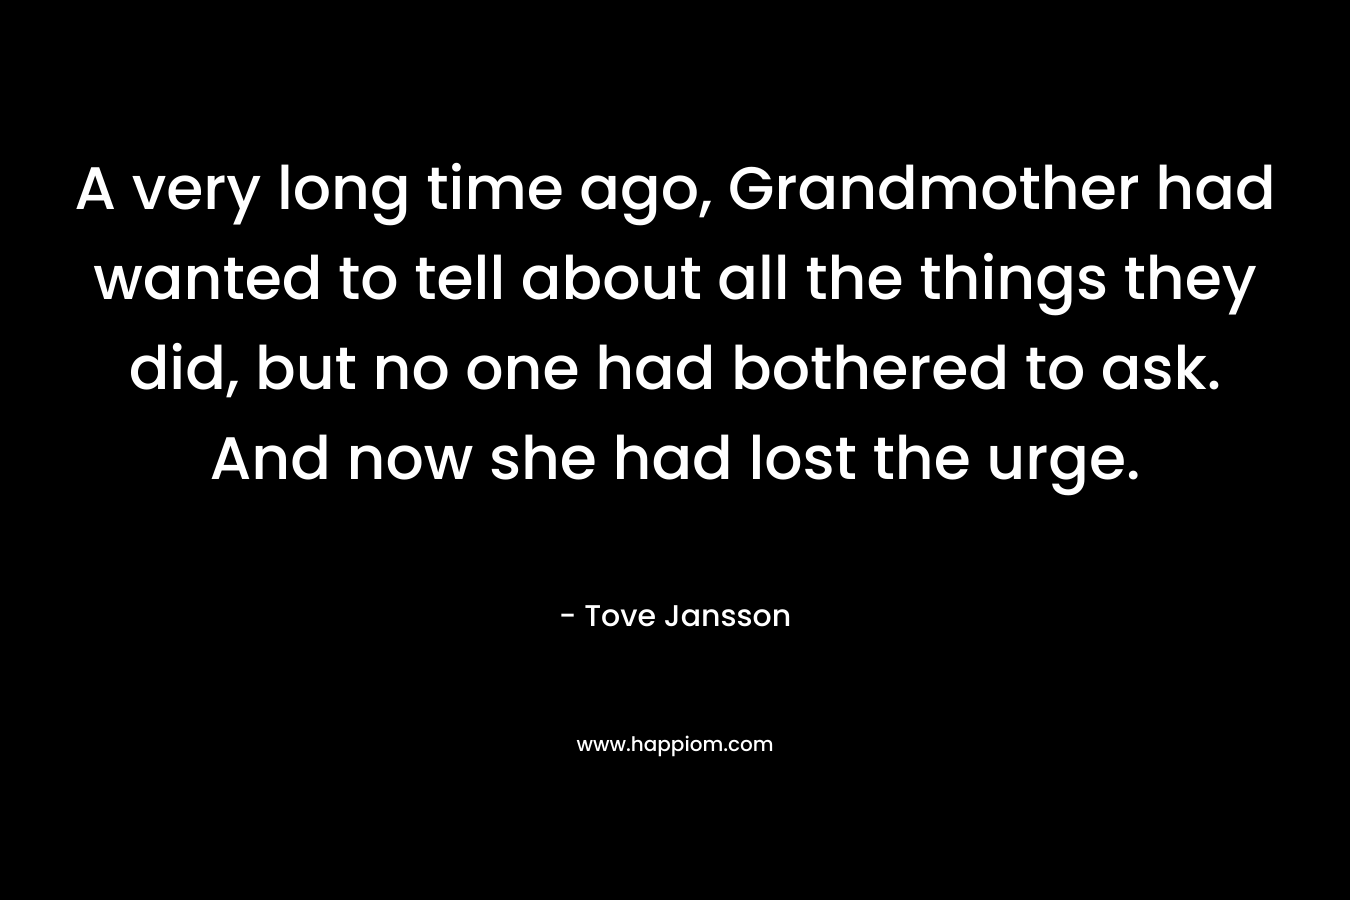 A very long time ago, Grandmother had wanted to tell about all the things they did, but no one had bothered to ask. And now she had lost the urge.